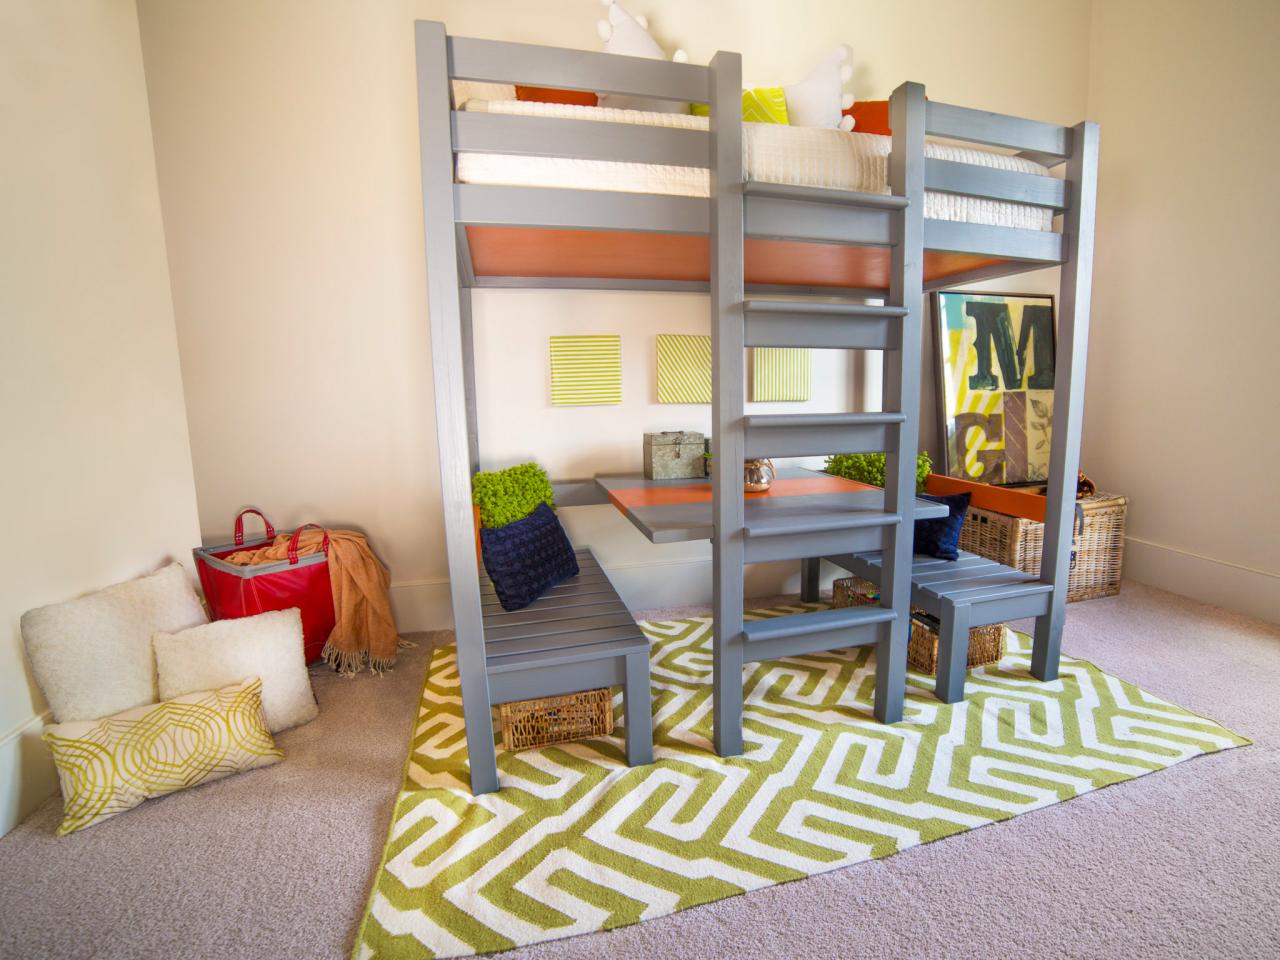 How To Build A Loft Bed With Built In, Loft Bed With Media Center